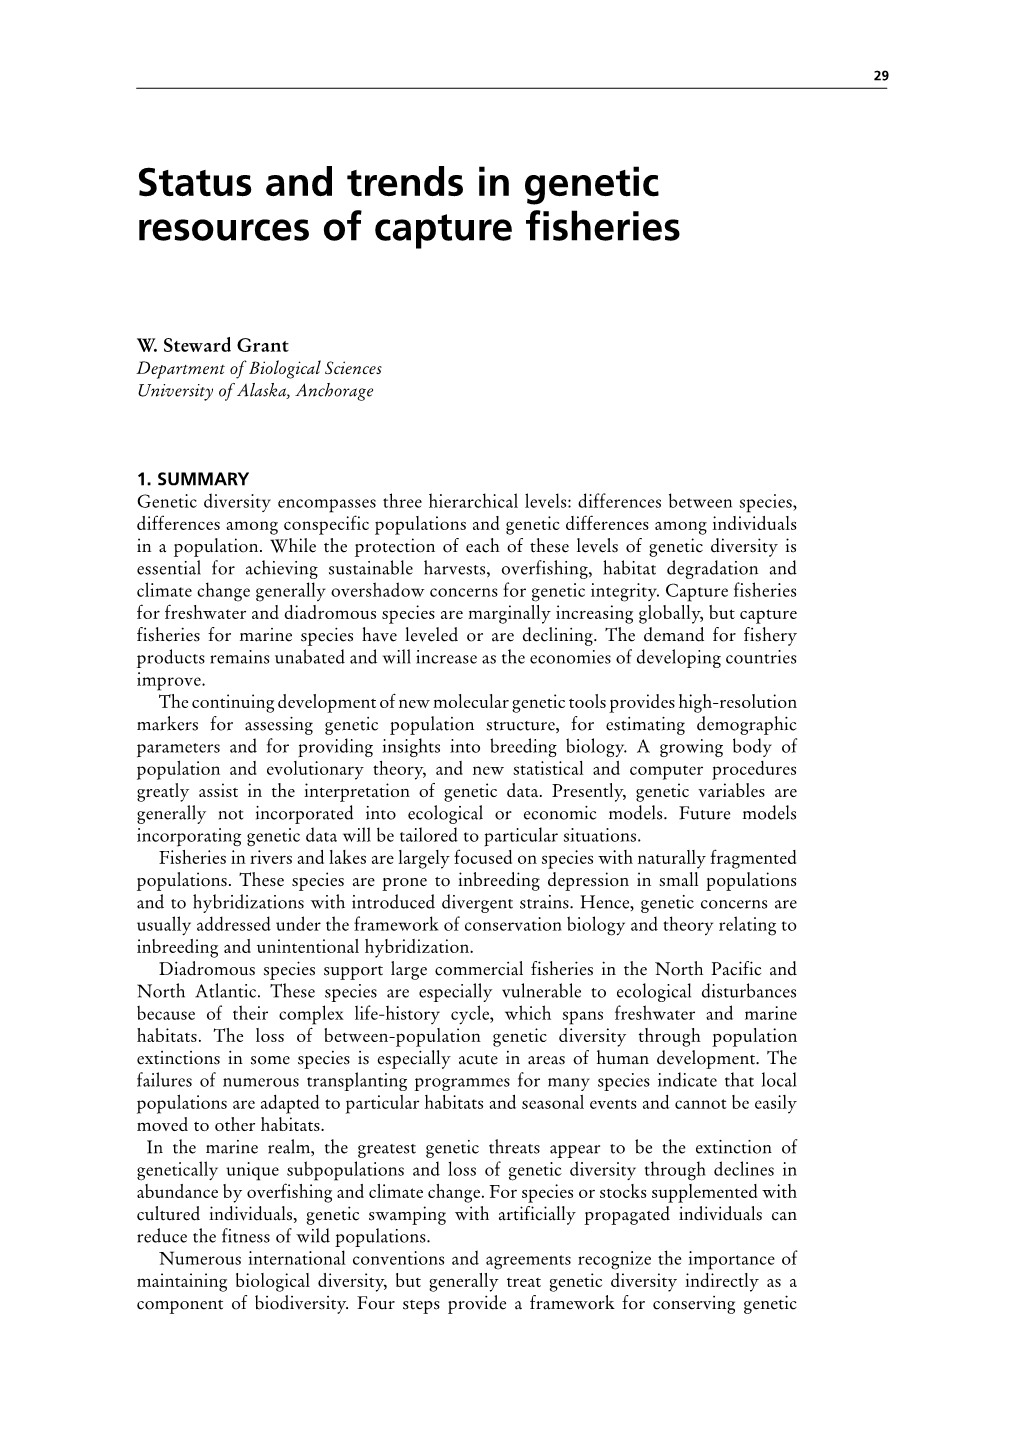 Status and Trends in Genetic Resources of Capture Fisheries